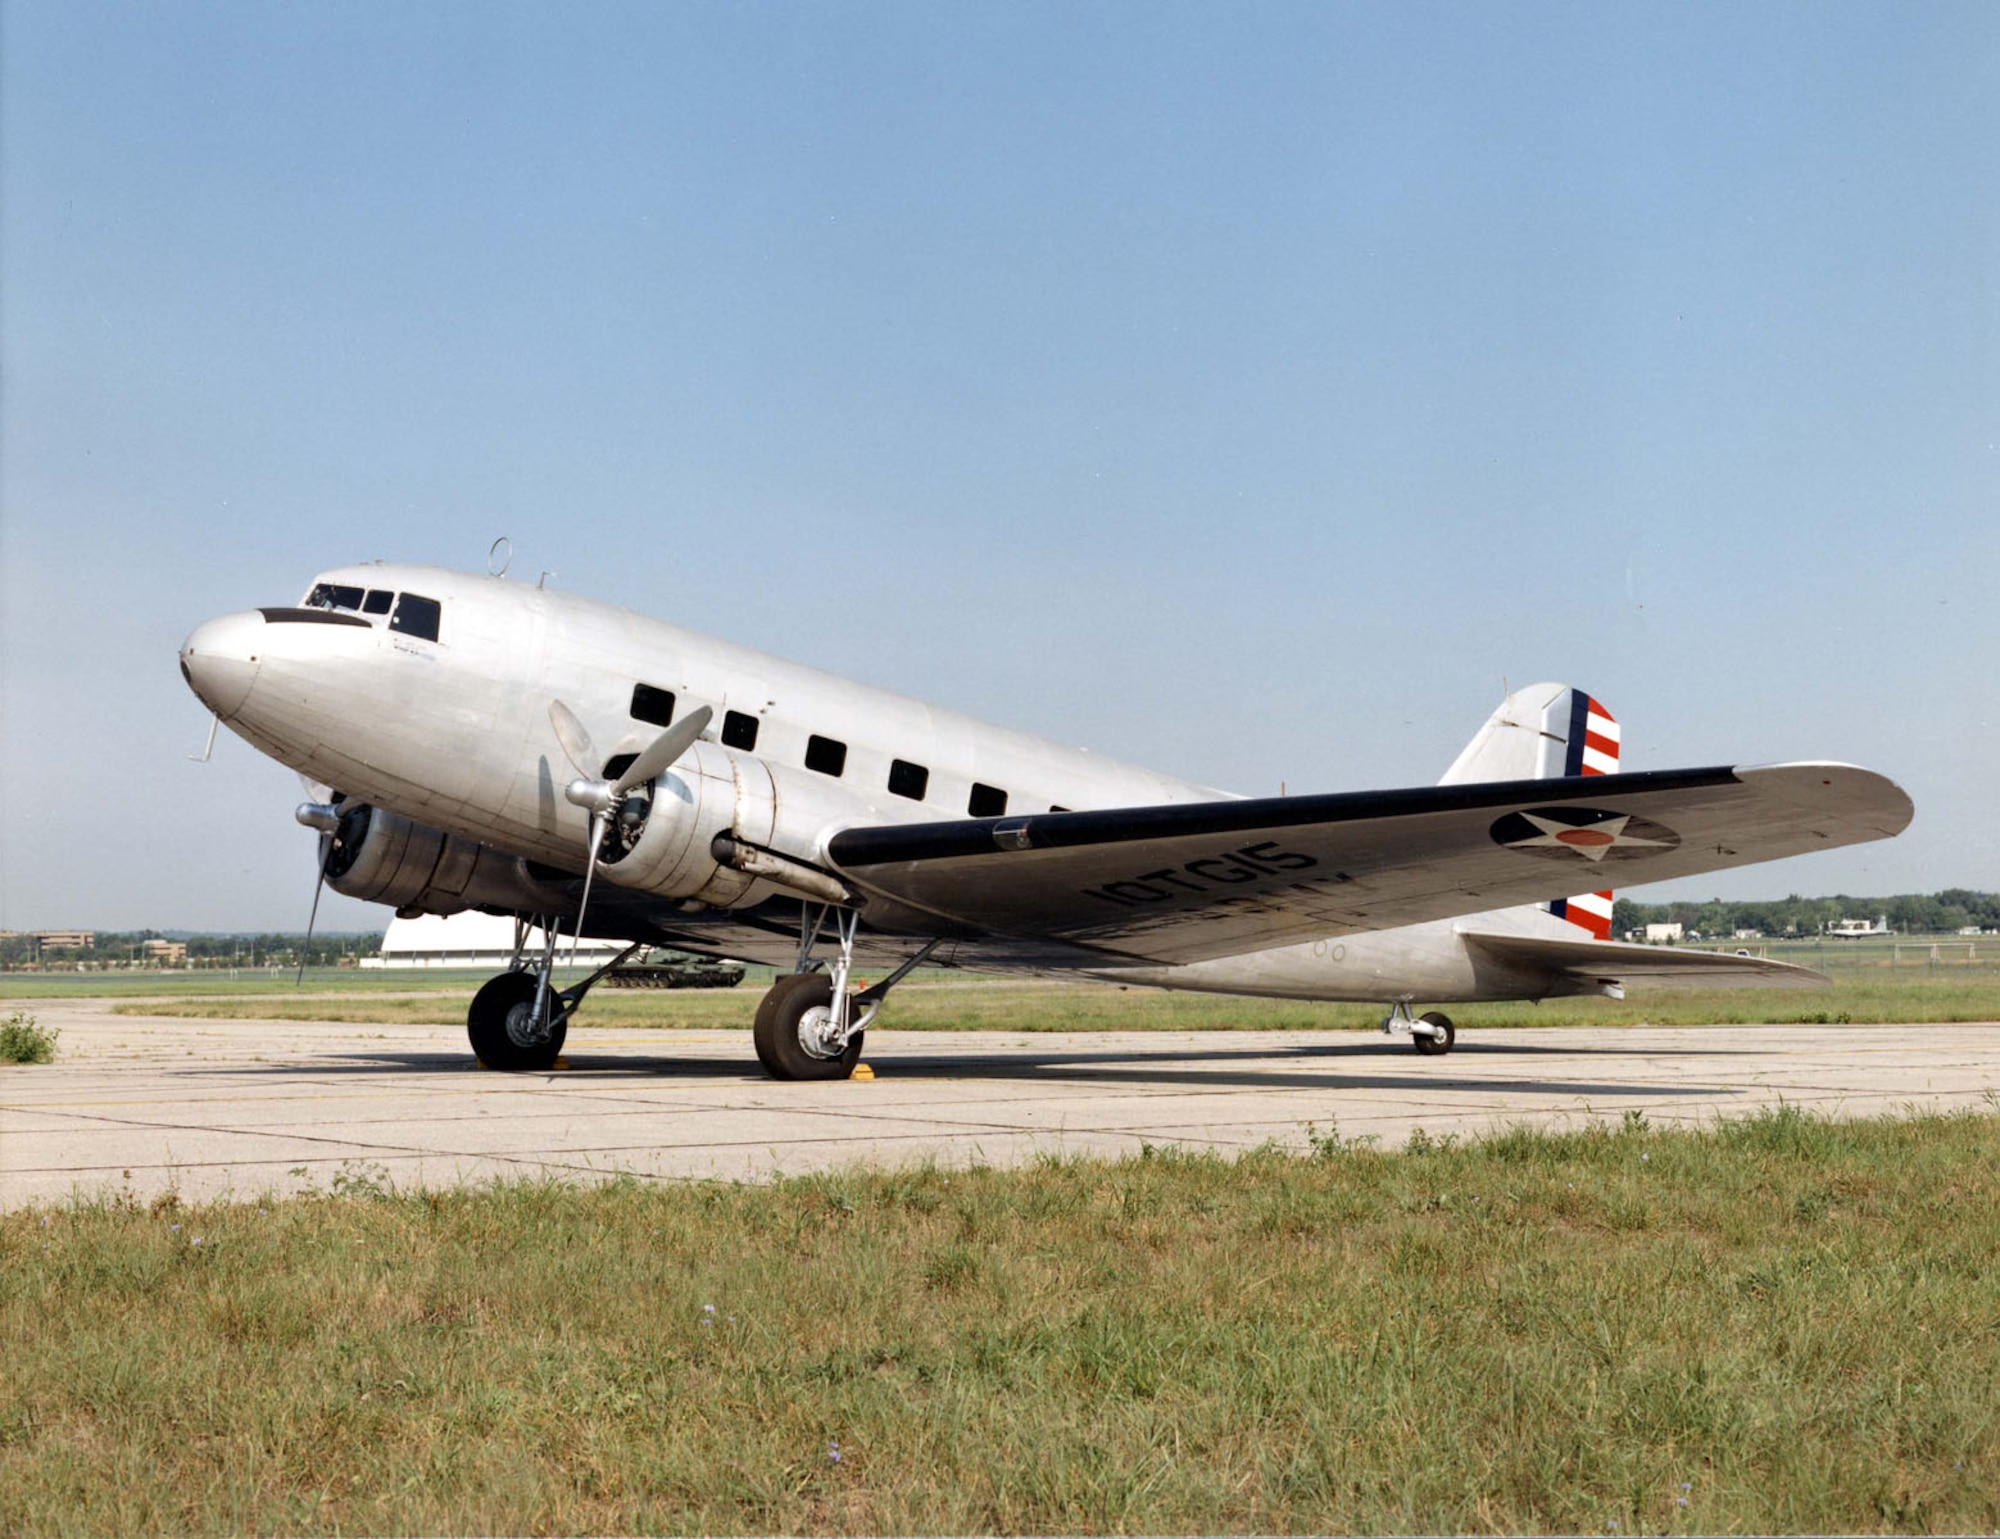 DAYTON, Ohio -- The Douglas C-39 is currently in storage at the National Museum of the United States Air Force. (U.S. Air Force photo)